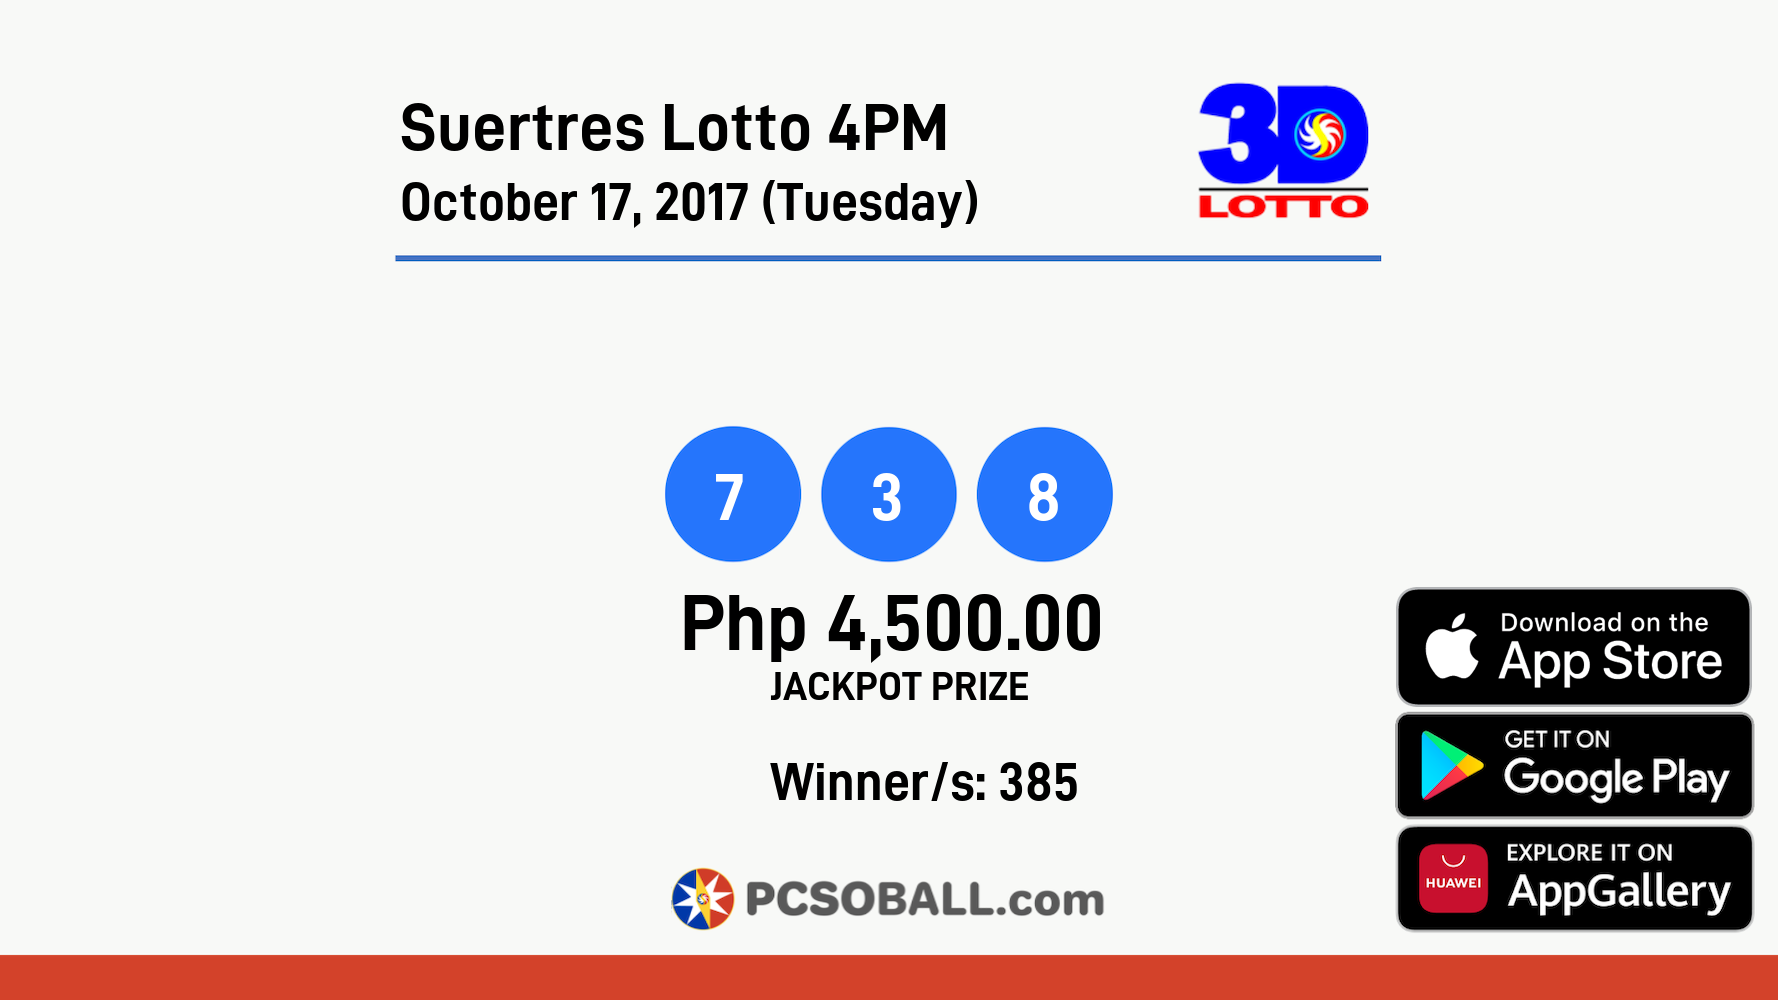 Suertres Lotto 4PM October 17, 2017 (Tuesday) Result